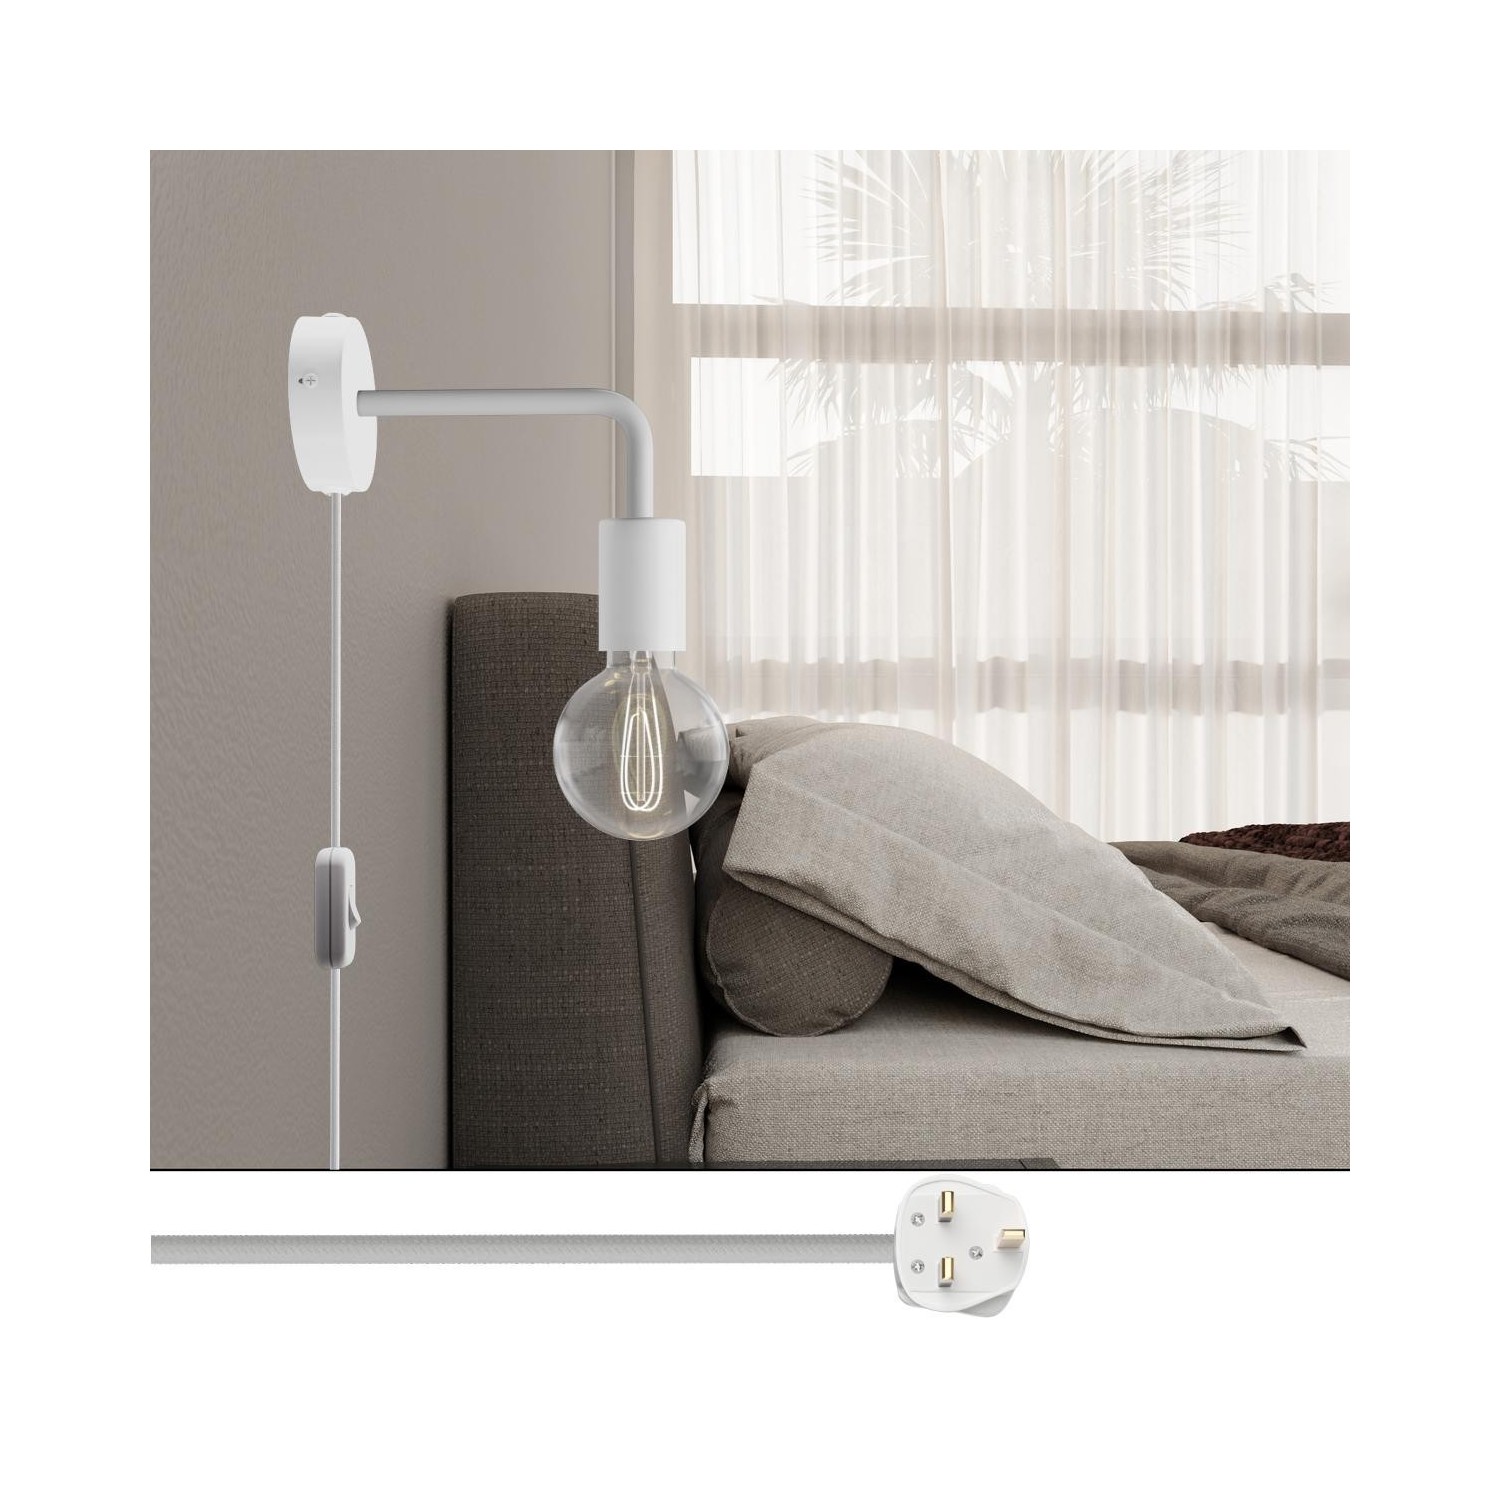 Spostaluce metal Lamp with curved extension